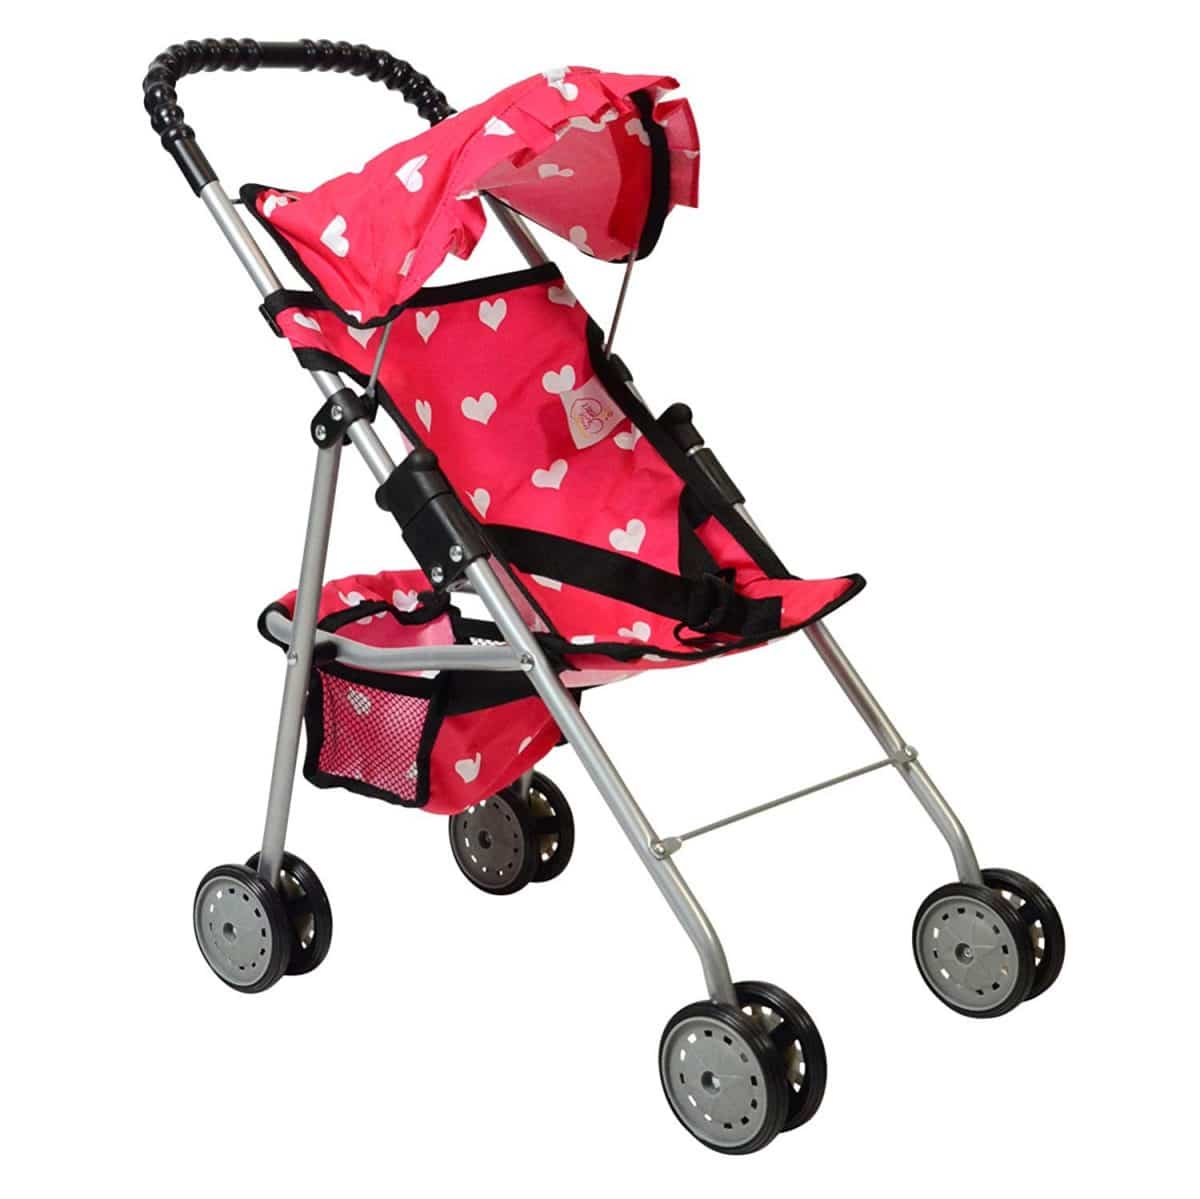 dolls buggy for 8 year old